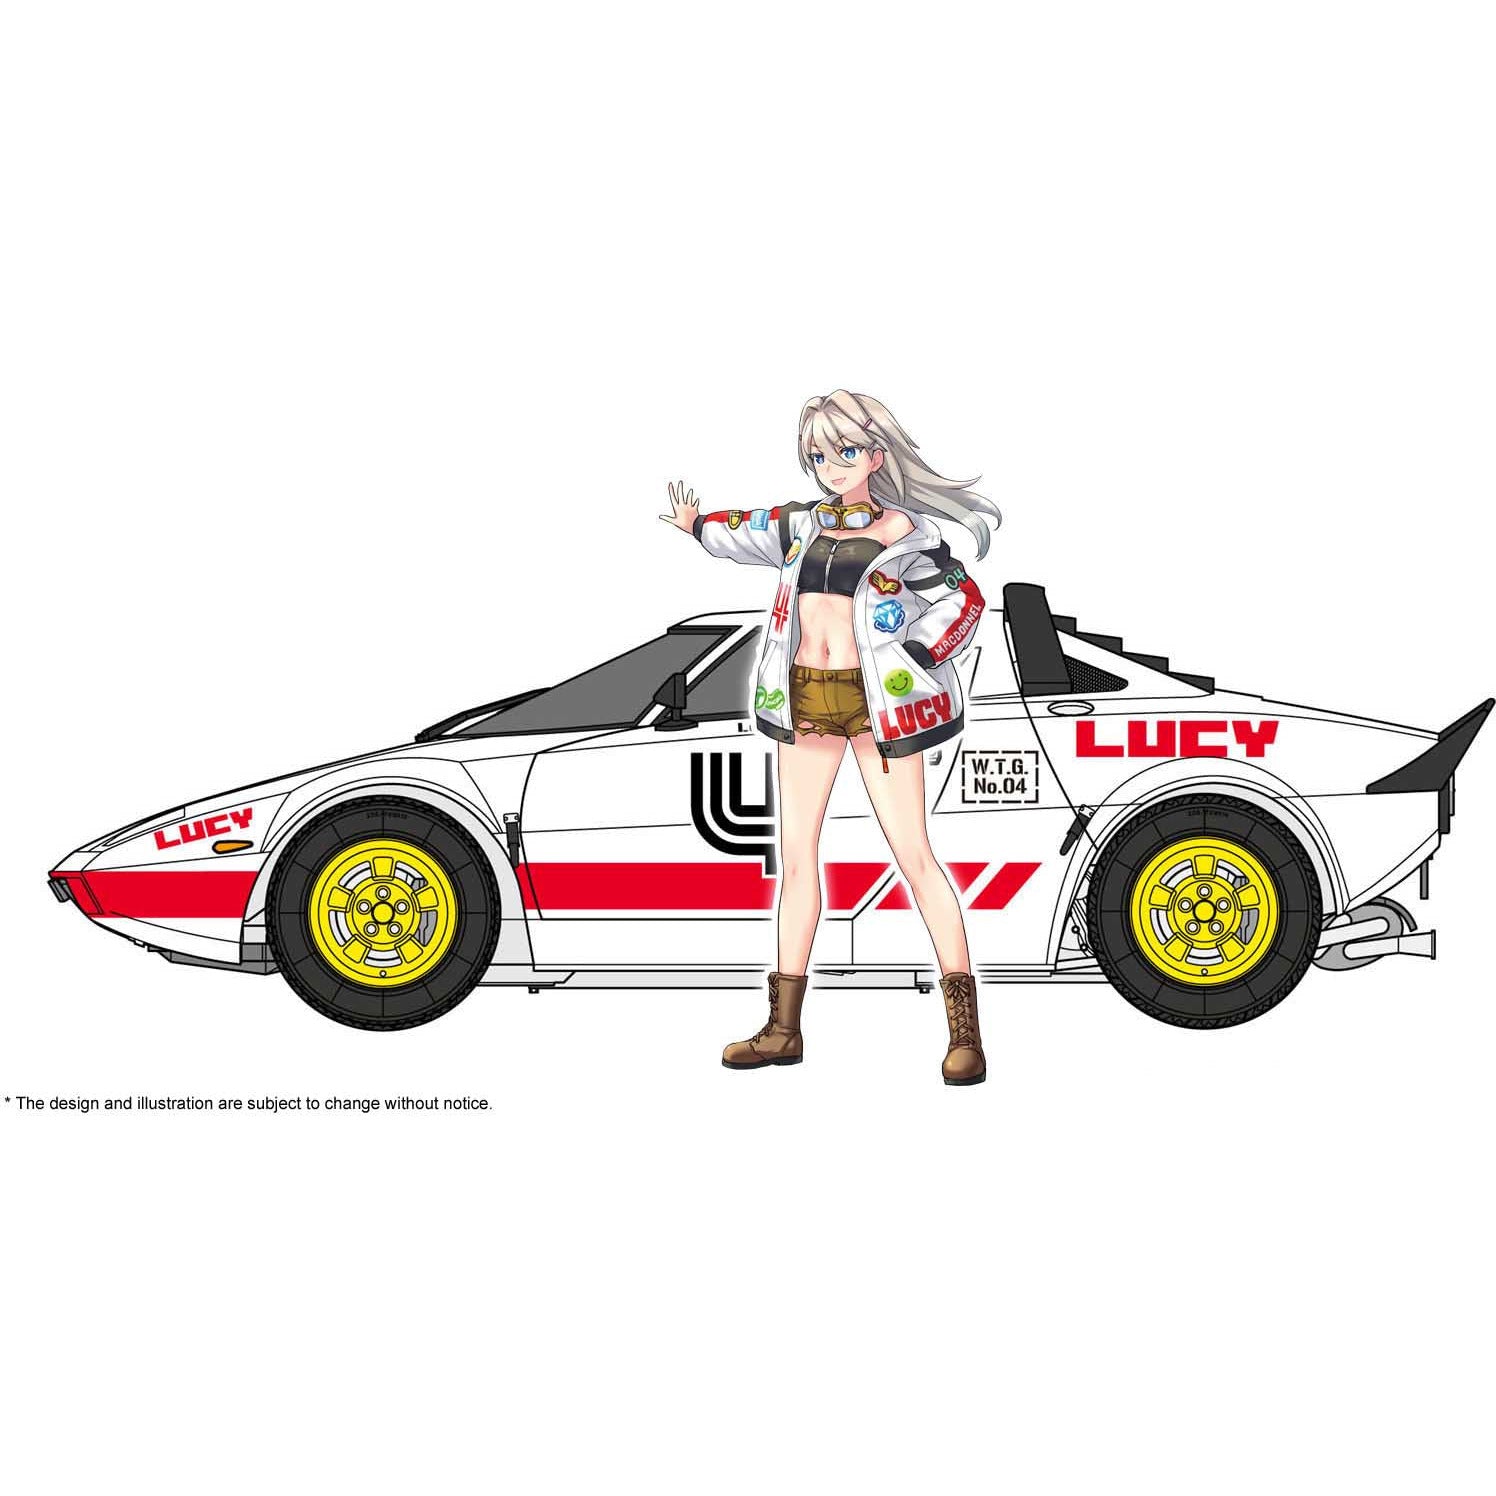 Wild Egg Girls Lancia Stratos “Lucy Mcdonnell” w/Figure 1/24 #52328 by Hasegawa